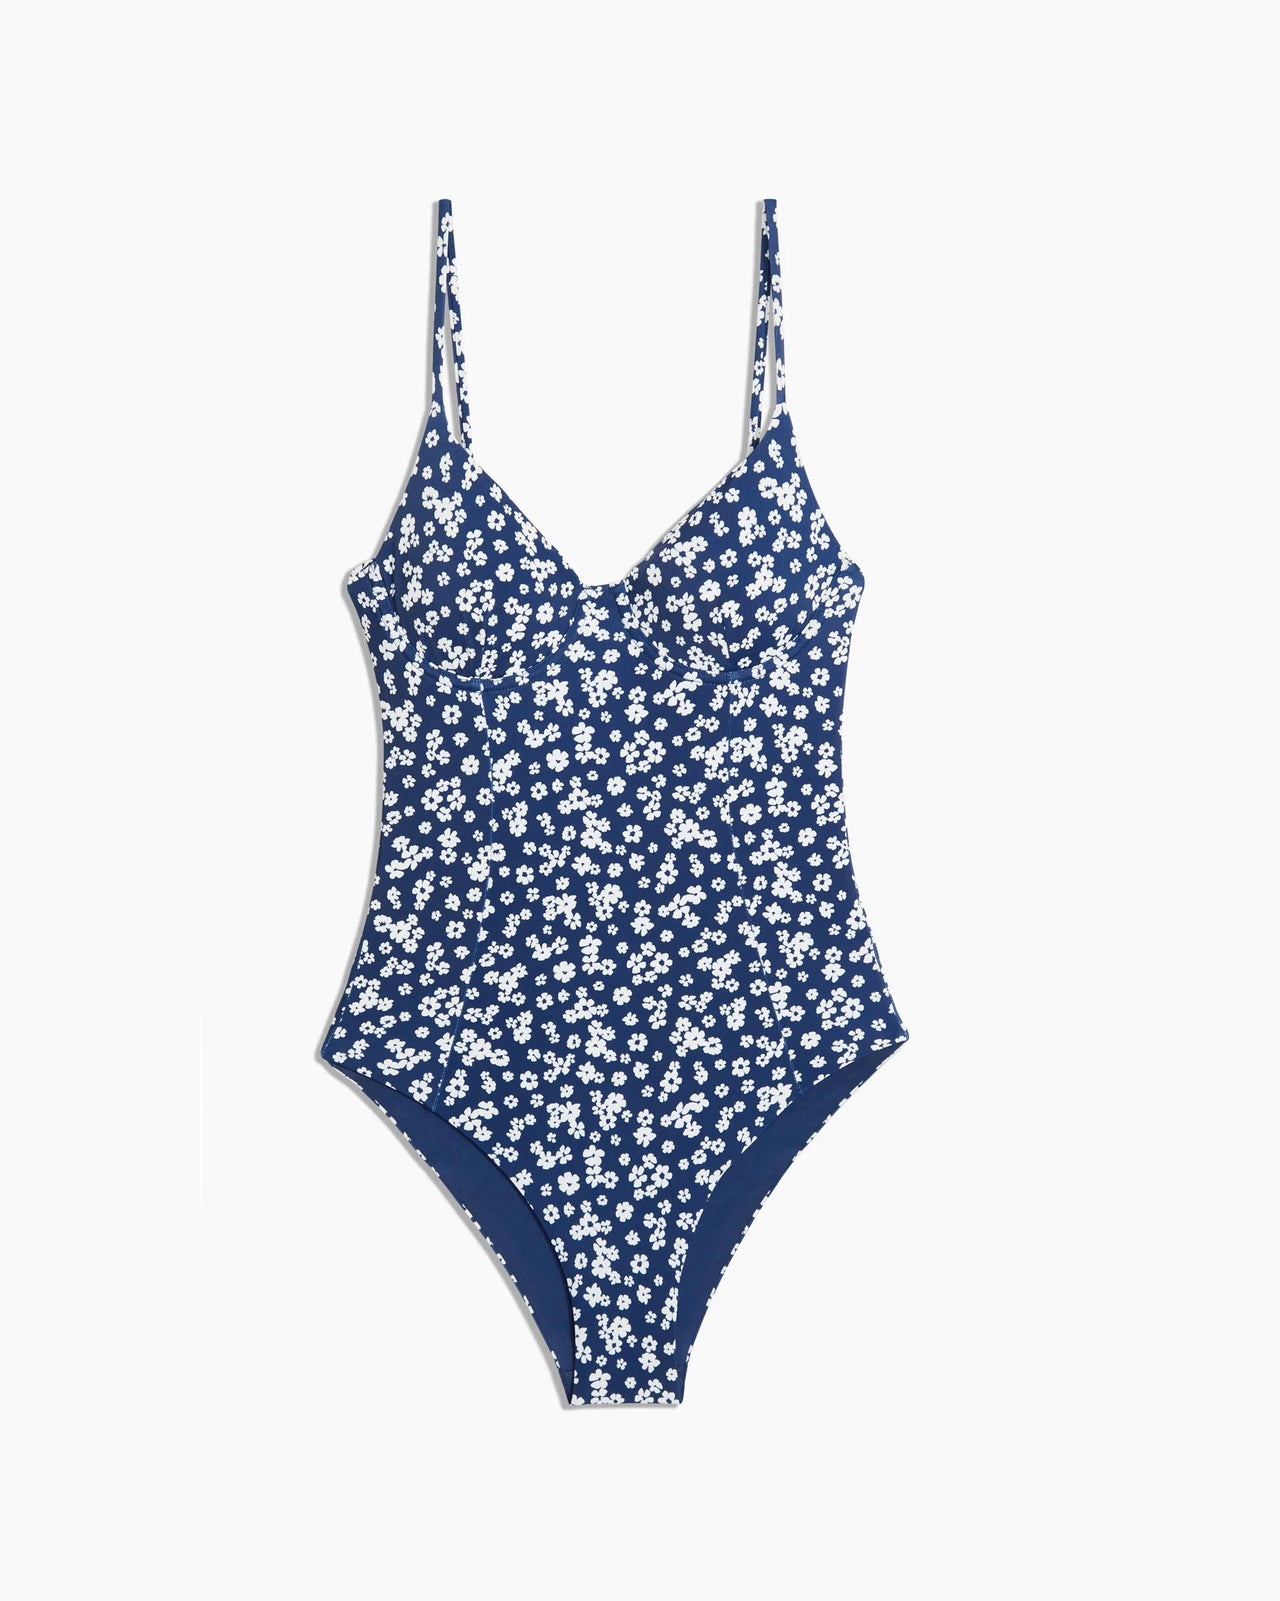 ONIA WOMENS CHELSEA ONE PIECE - NEW BLUE WHITE FLORAL